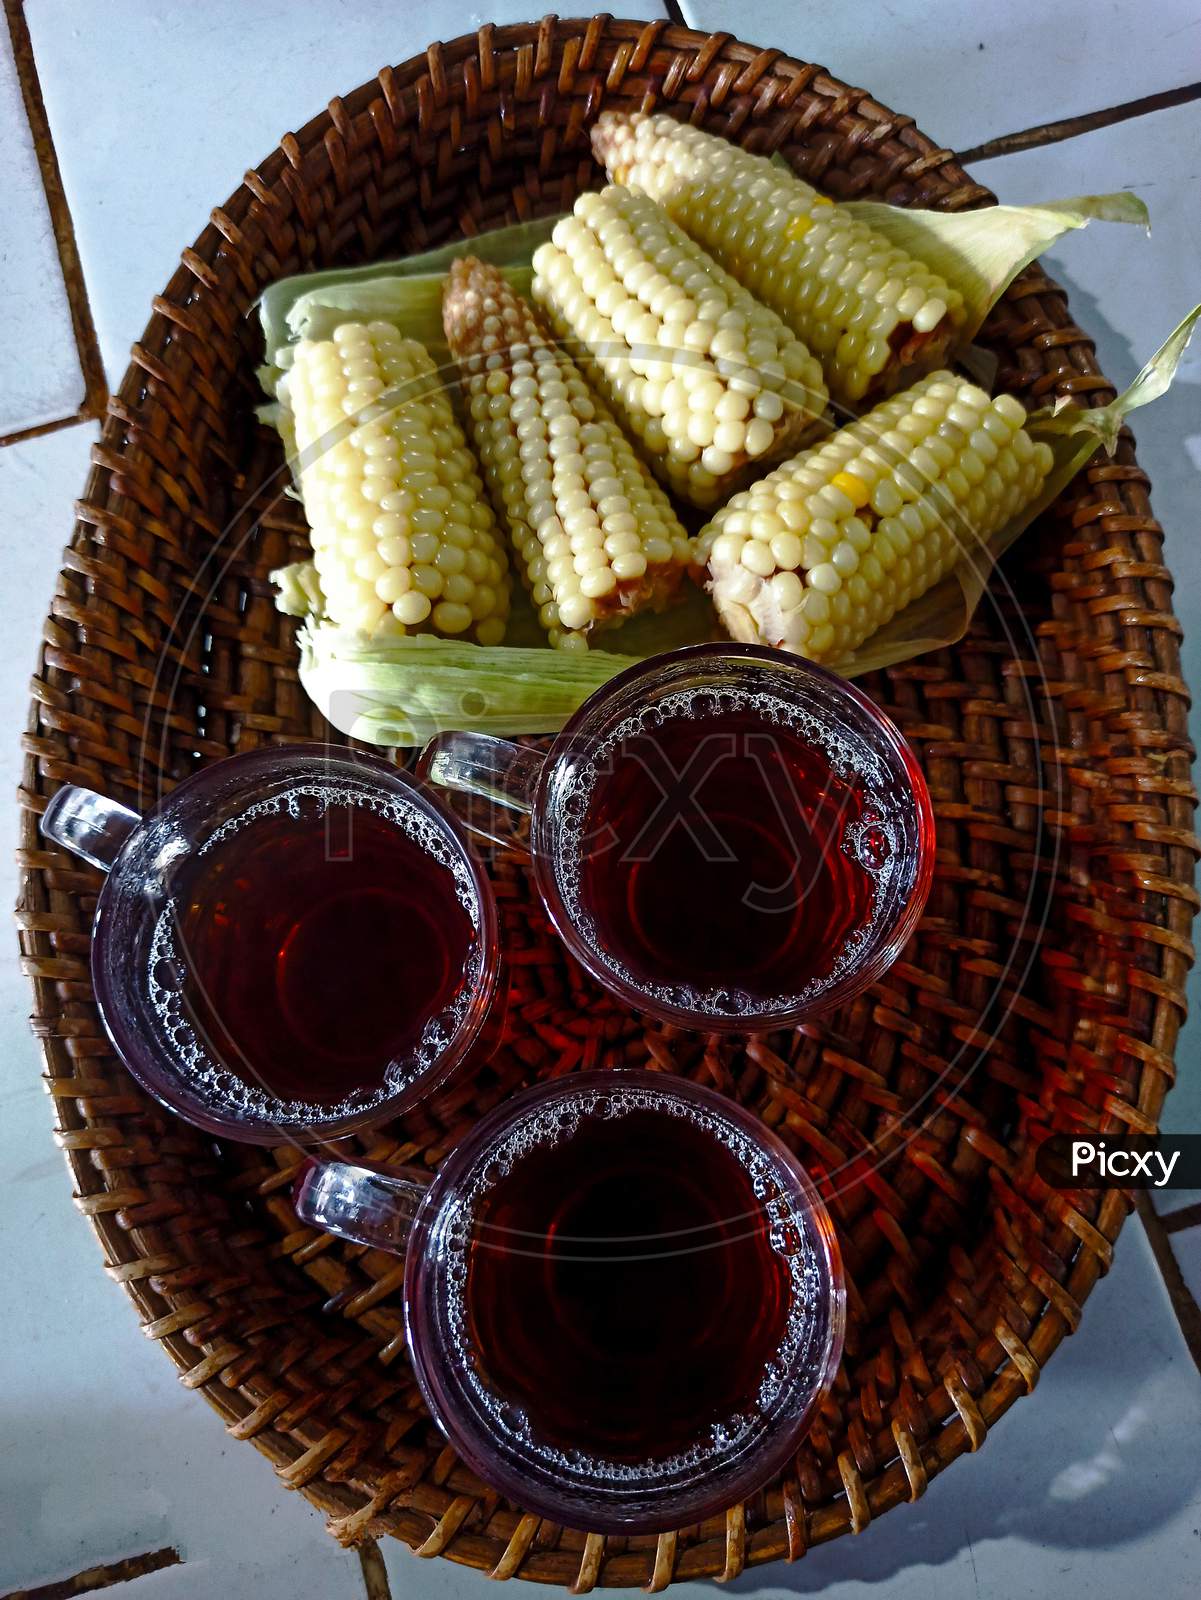 Corn and red tea